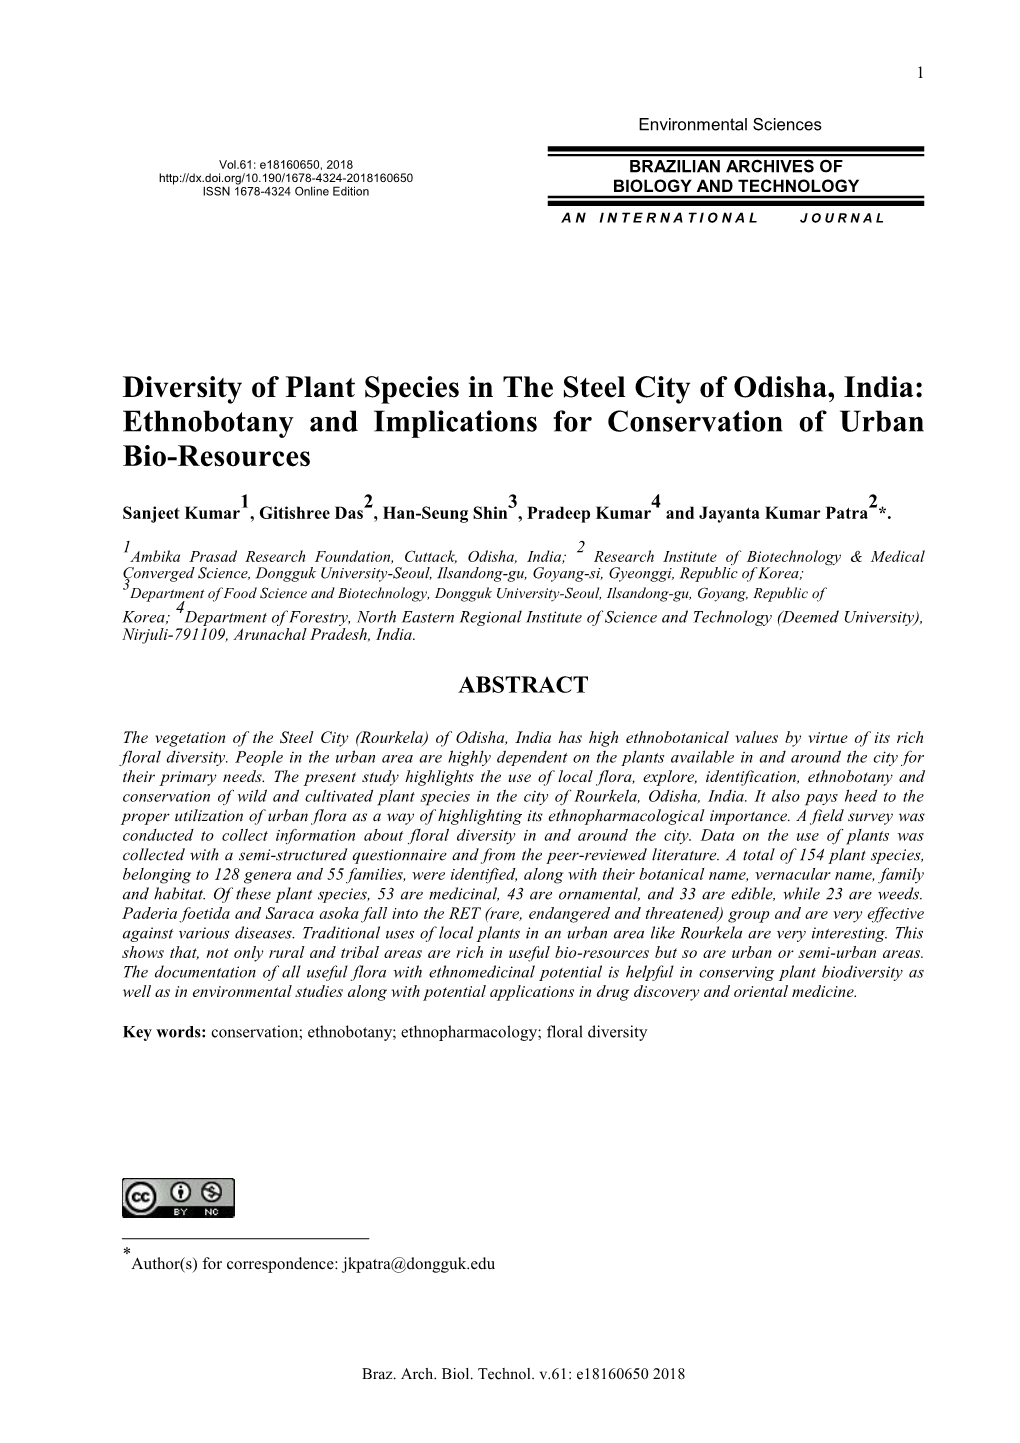 Diversity of Plant Species in the Steel City of Odisha, India: Ethnobotany and Implications for Conservation of Urban Bio-Resources